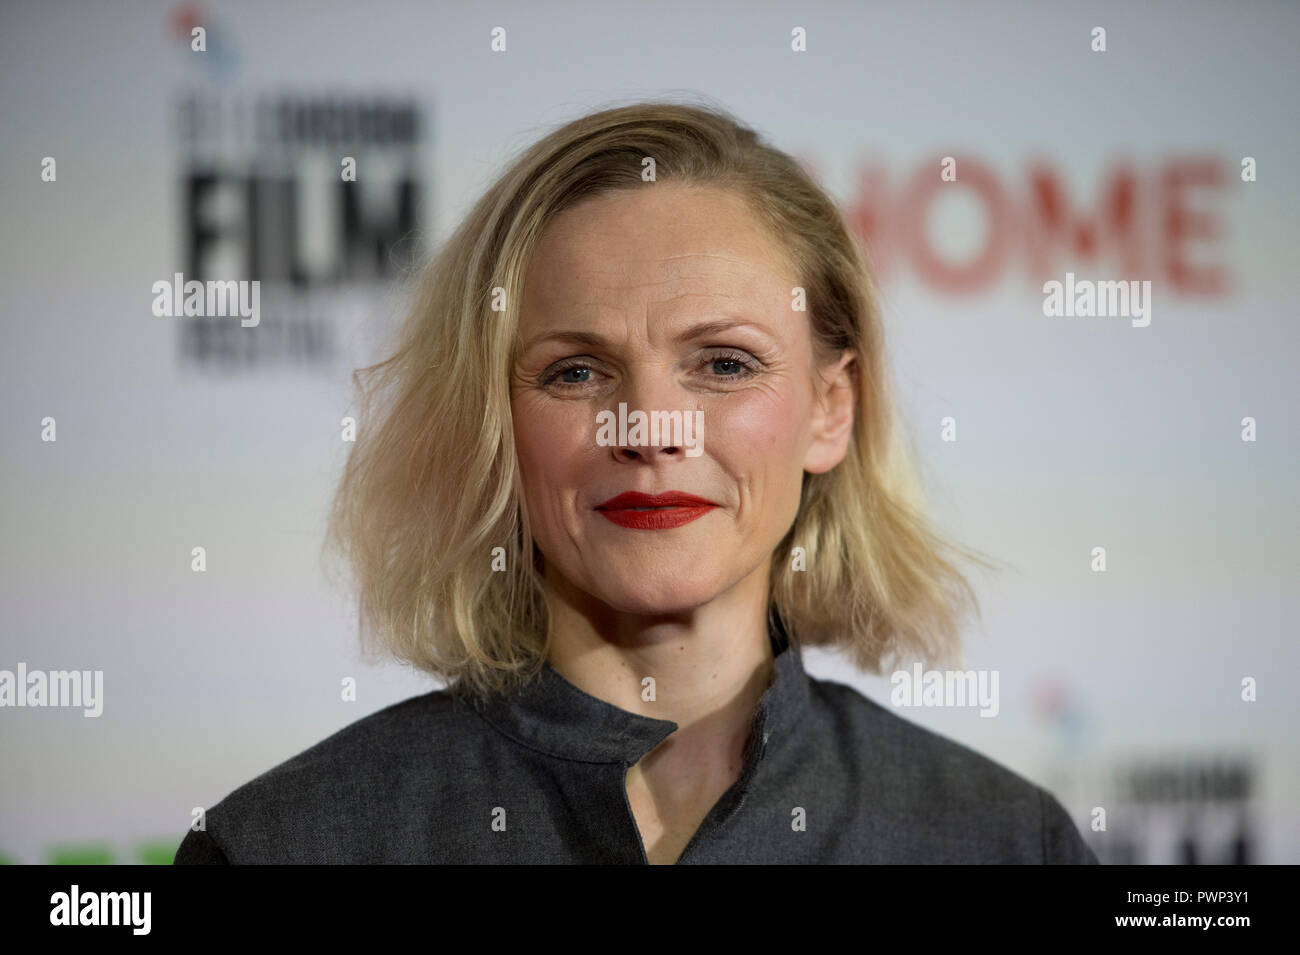 Manchester, UK. 17th October 2018. Actress Maxine Peake who plays the character Nellie arrives at the BFI London Film Festival premiere of Peterloo, at the Home complex in Manchester. Credit: Russell Hart/Alamy Live News Stock Photo